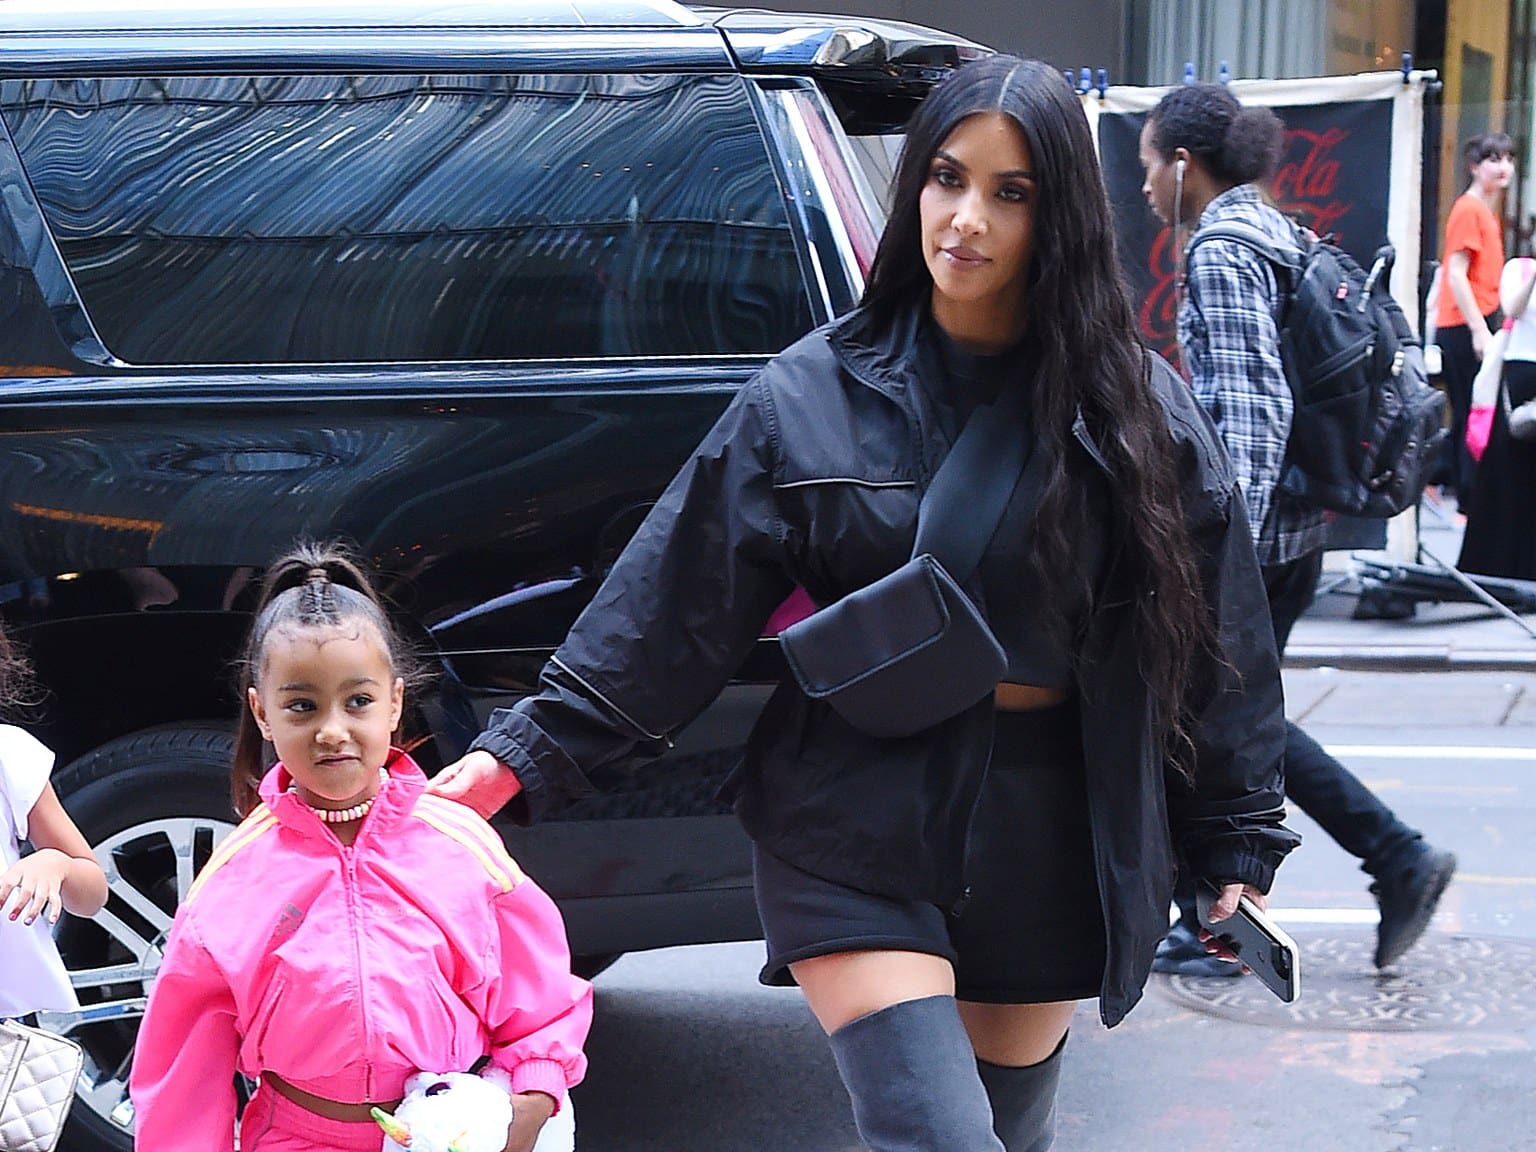 Kim Kardashian Calls Her Daughter A Fashionista - Check Out The Sweet Photos In Which Northie Rocks Amazing Outfits